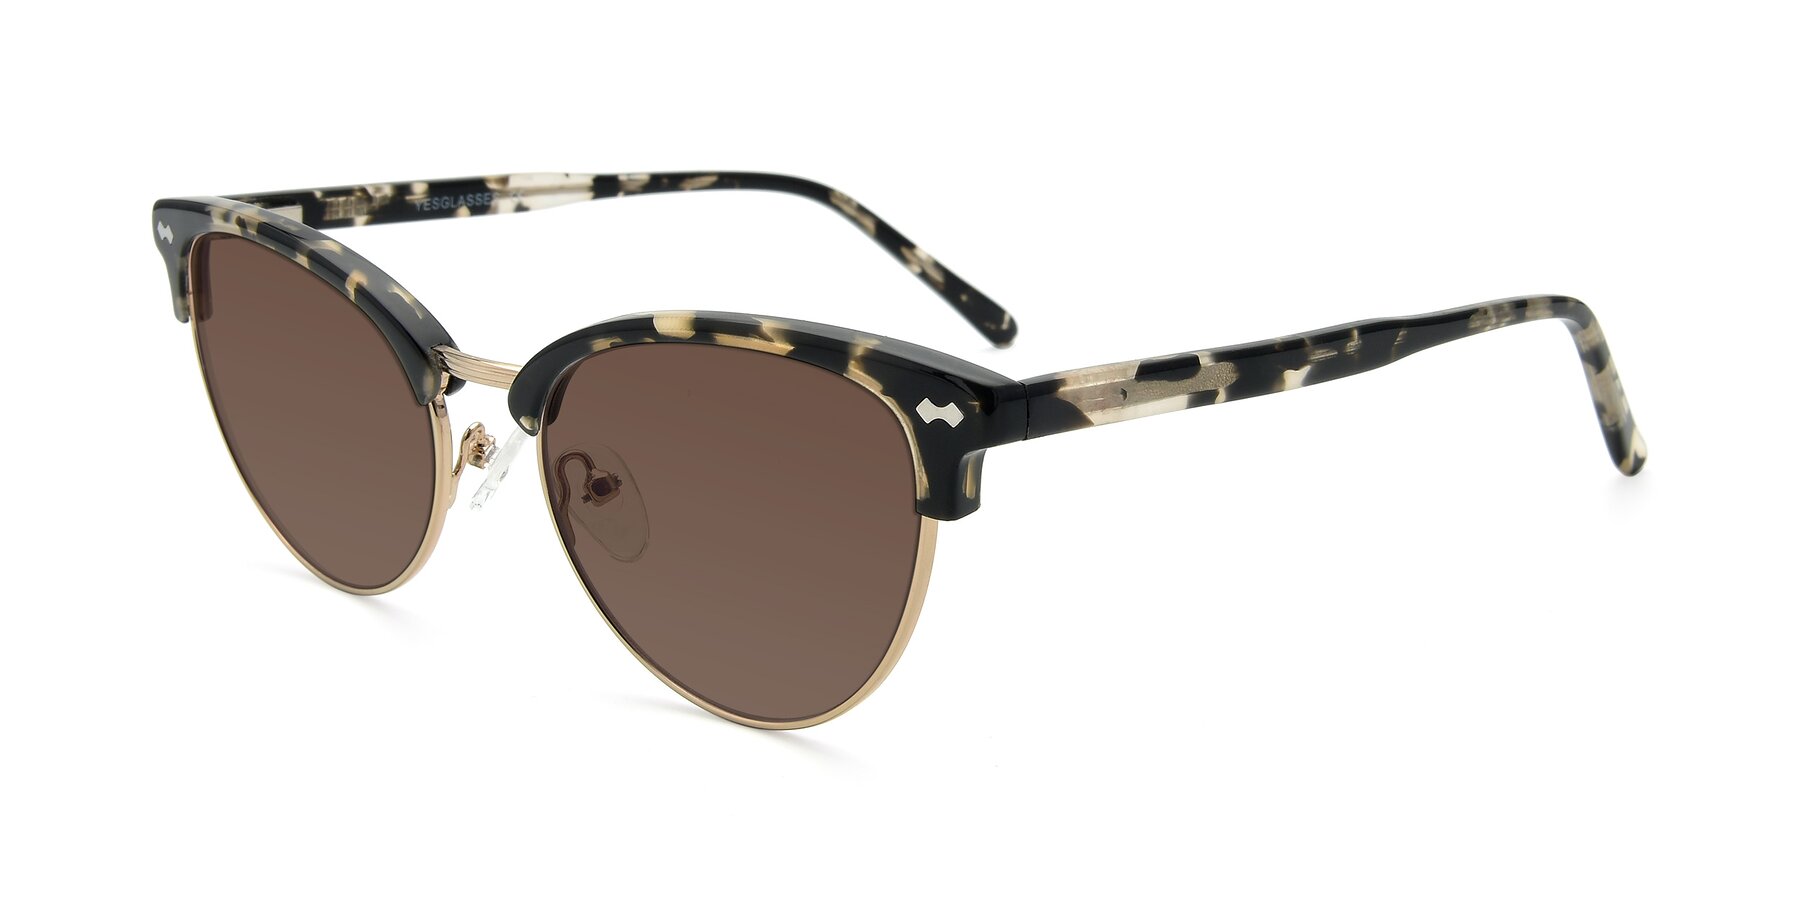 Angle of 17461 in Tortoise-Gold with Brown Tinted Lenses